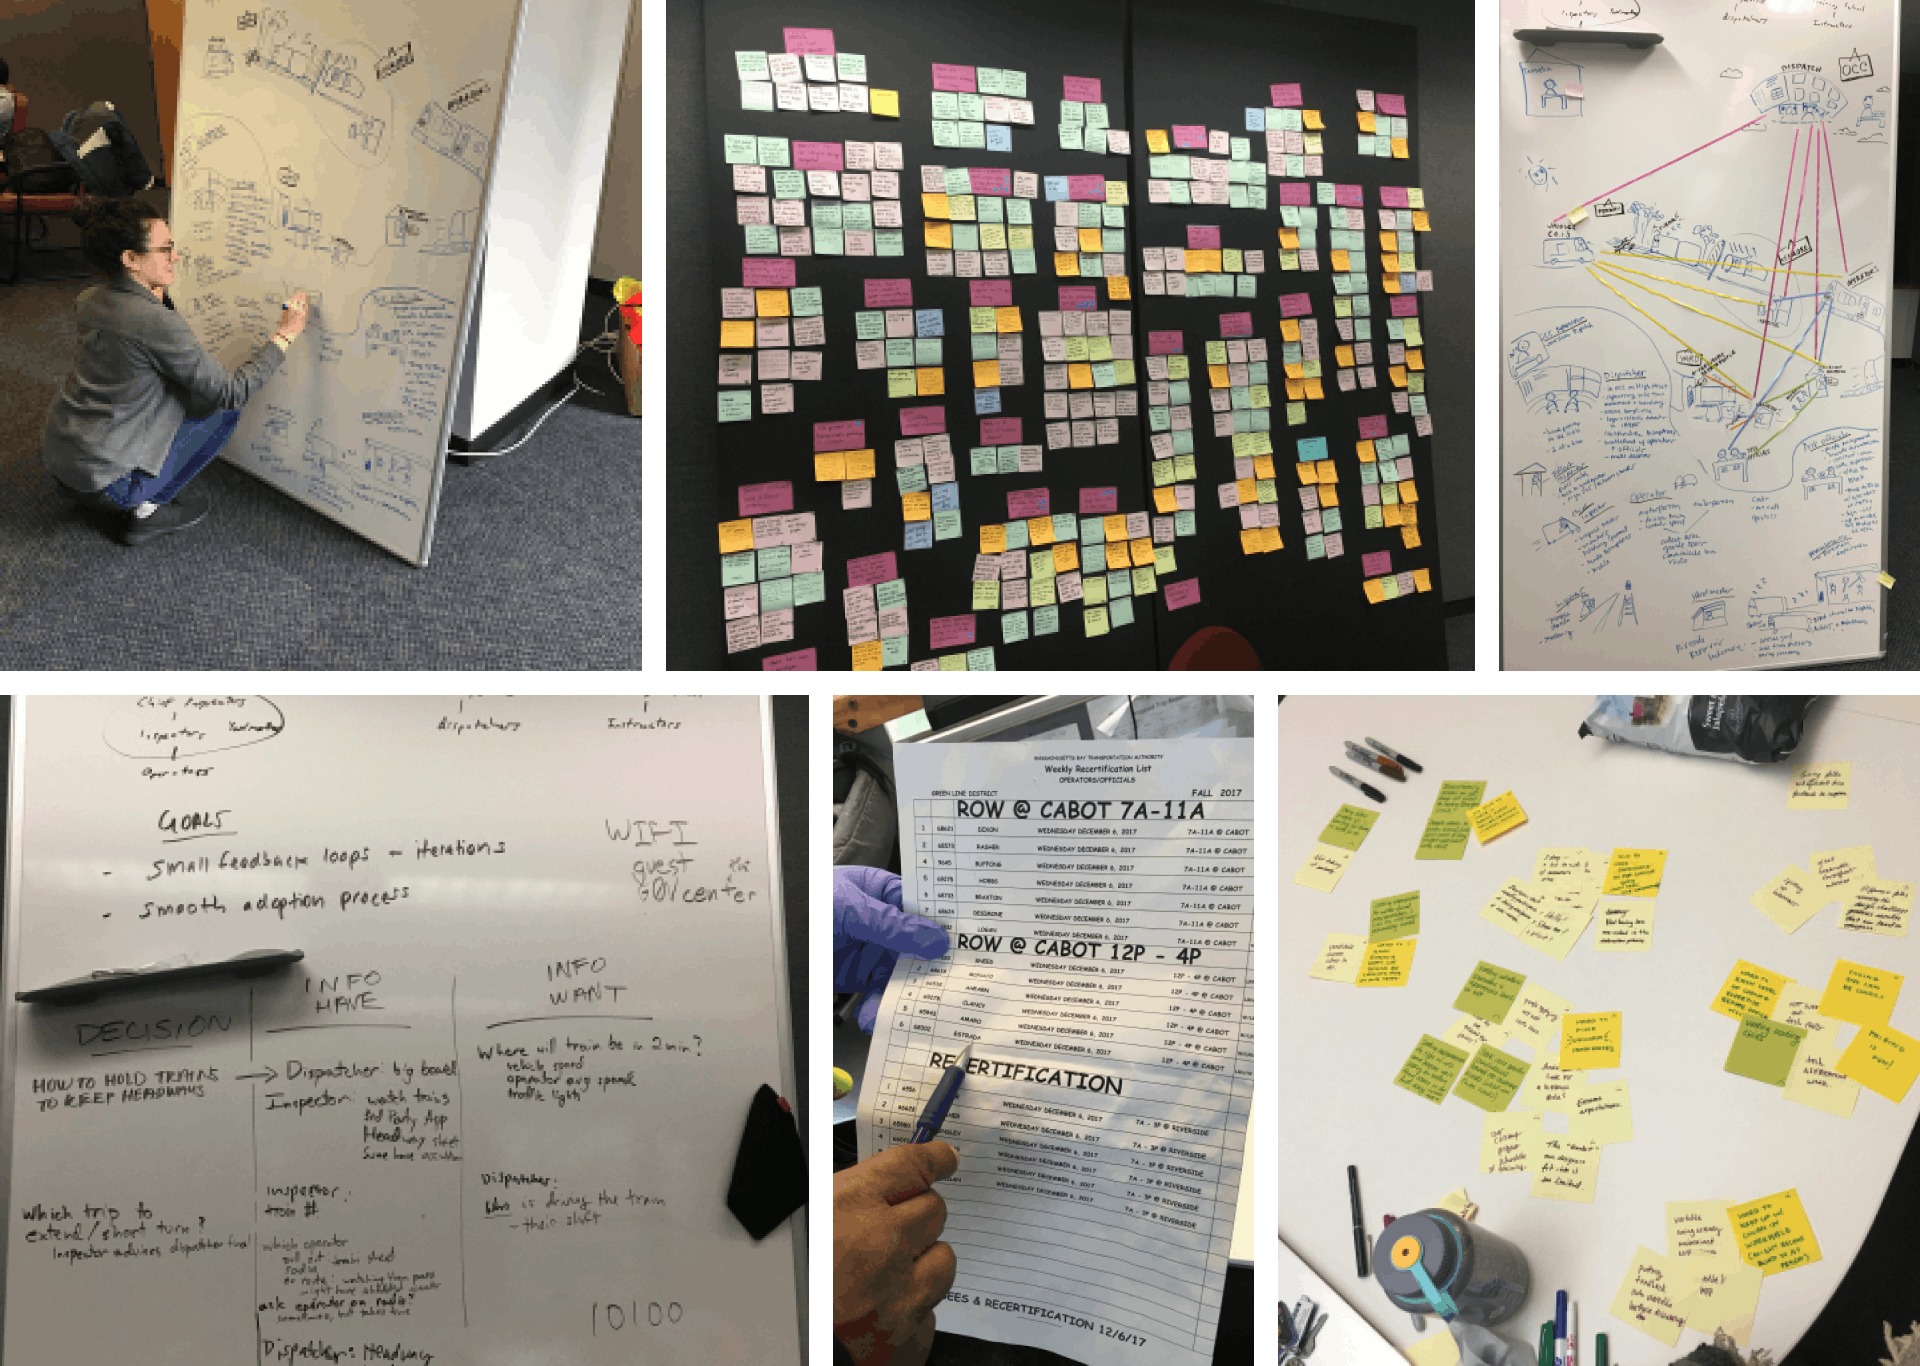 Six photos of the MBTA design workshop; a designer drawing a user journey, a wall of organized sticky notes, a mind map on a whiteboard, notes on a whiteboard, a paper form, sticky notes on a meeting table.